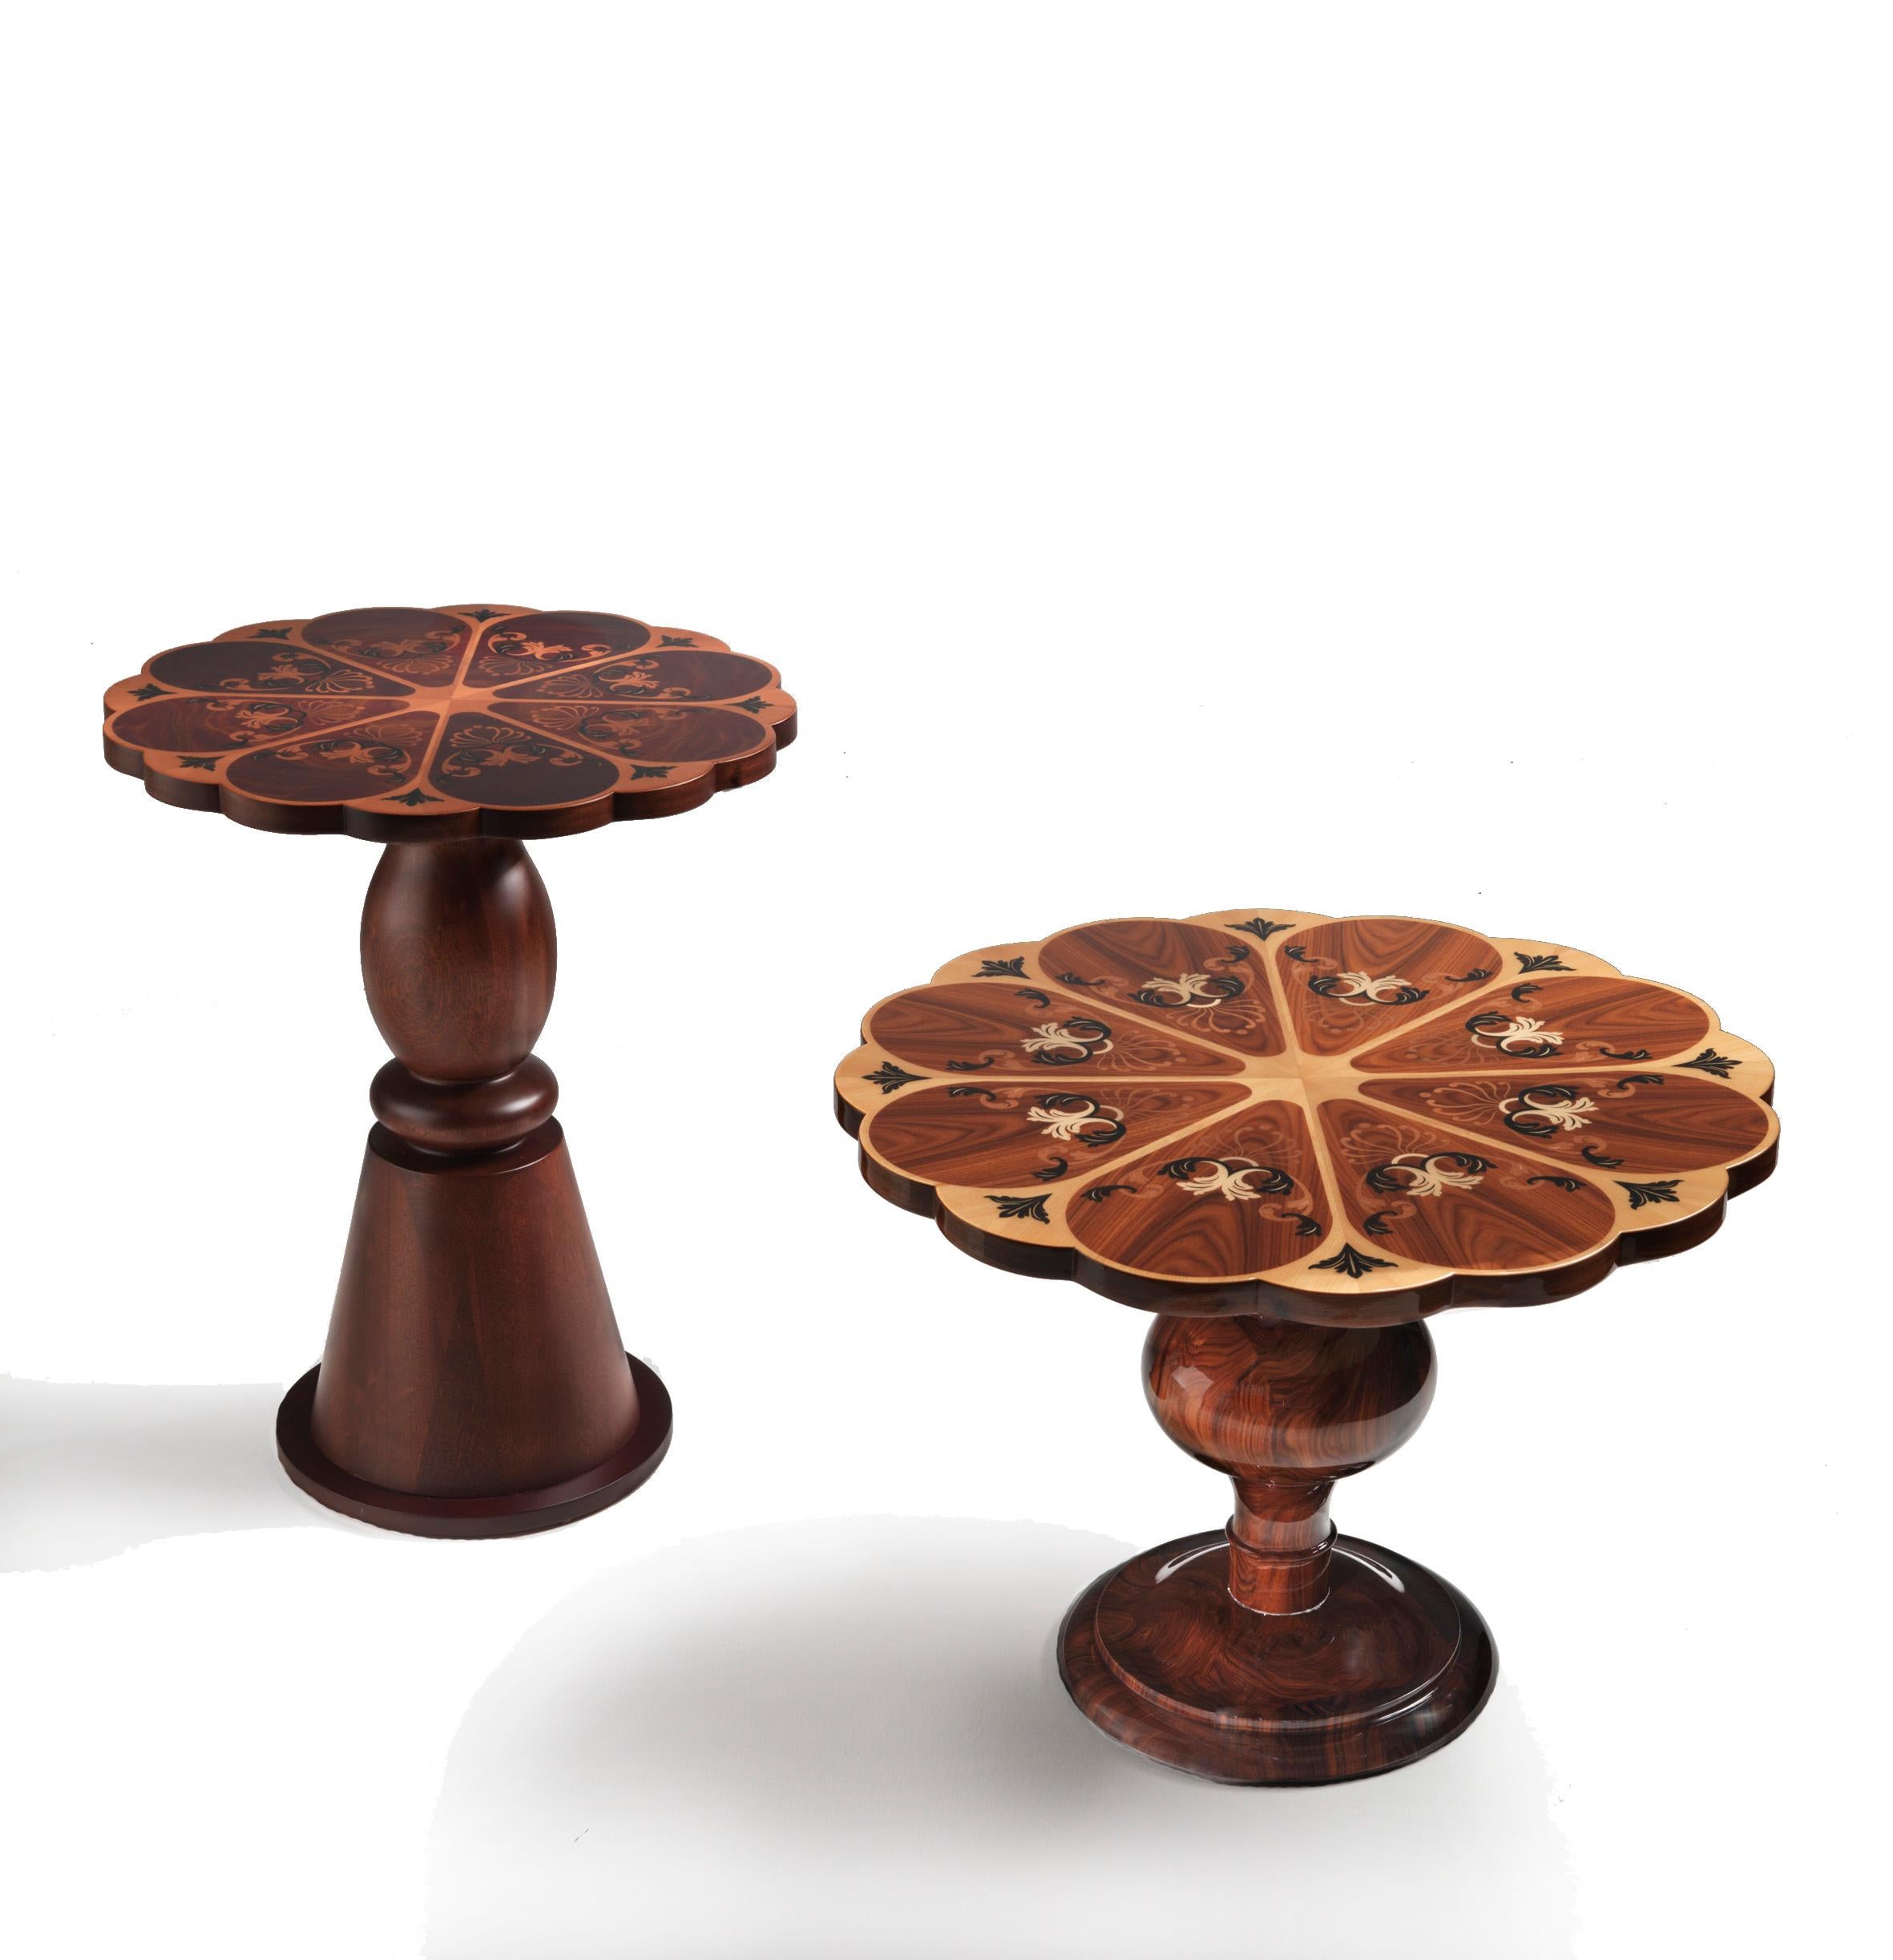 Scalloped Lamp Table is an exquisite blend of artistry and functionality that adds a touch of elegance to any space. The central turned column and the delicately shaped frame top create a visual symphony that draws the eye to the intricate inlay,